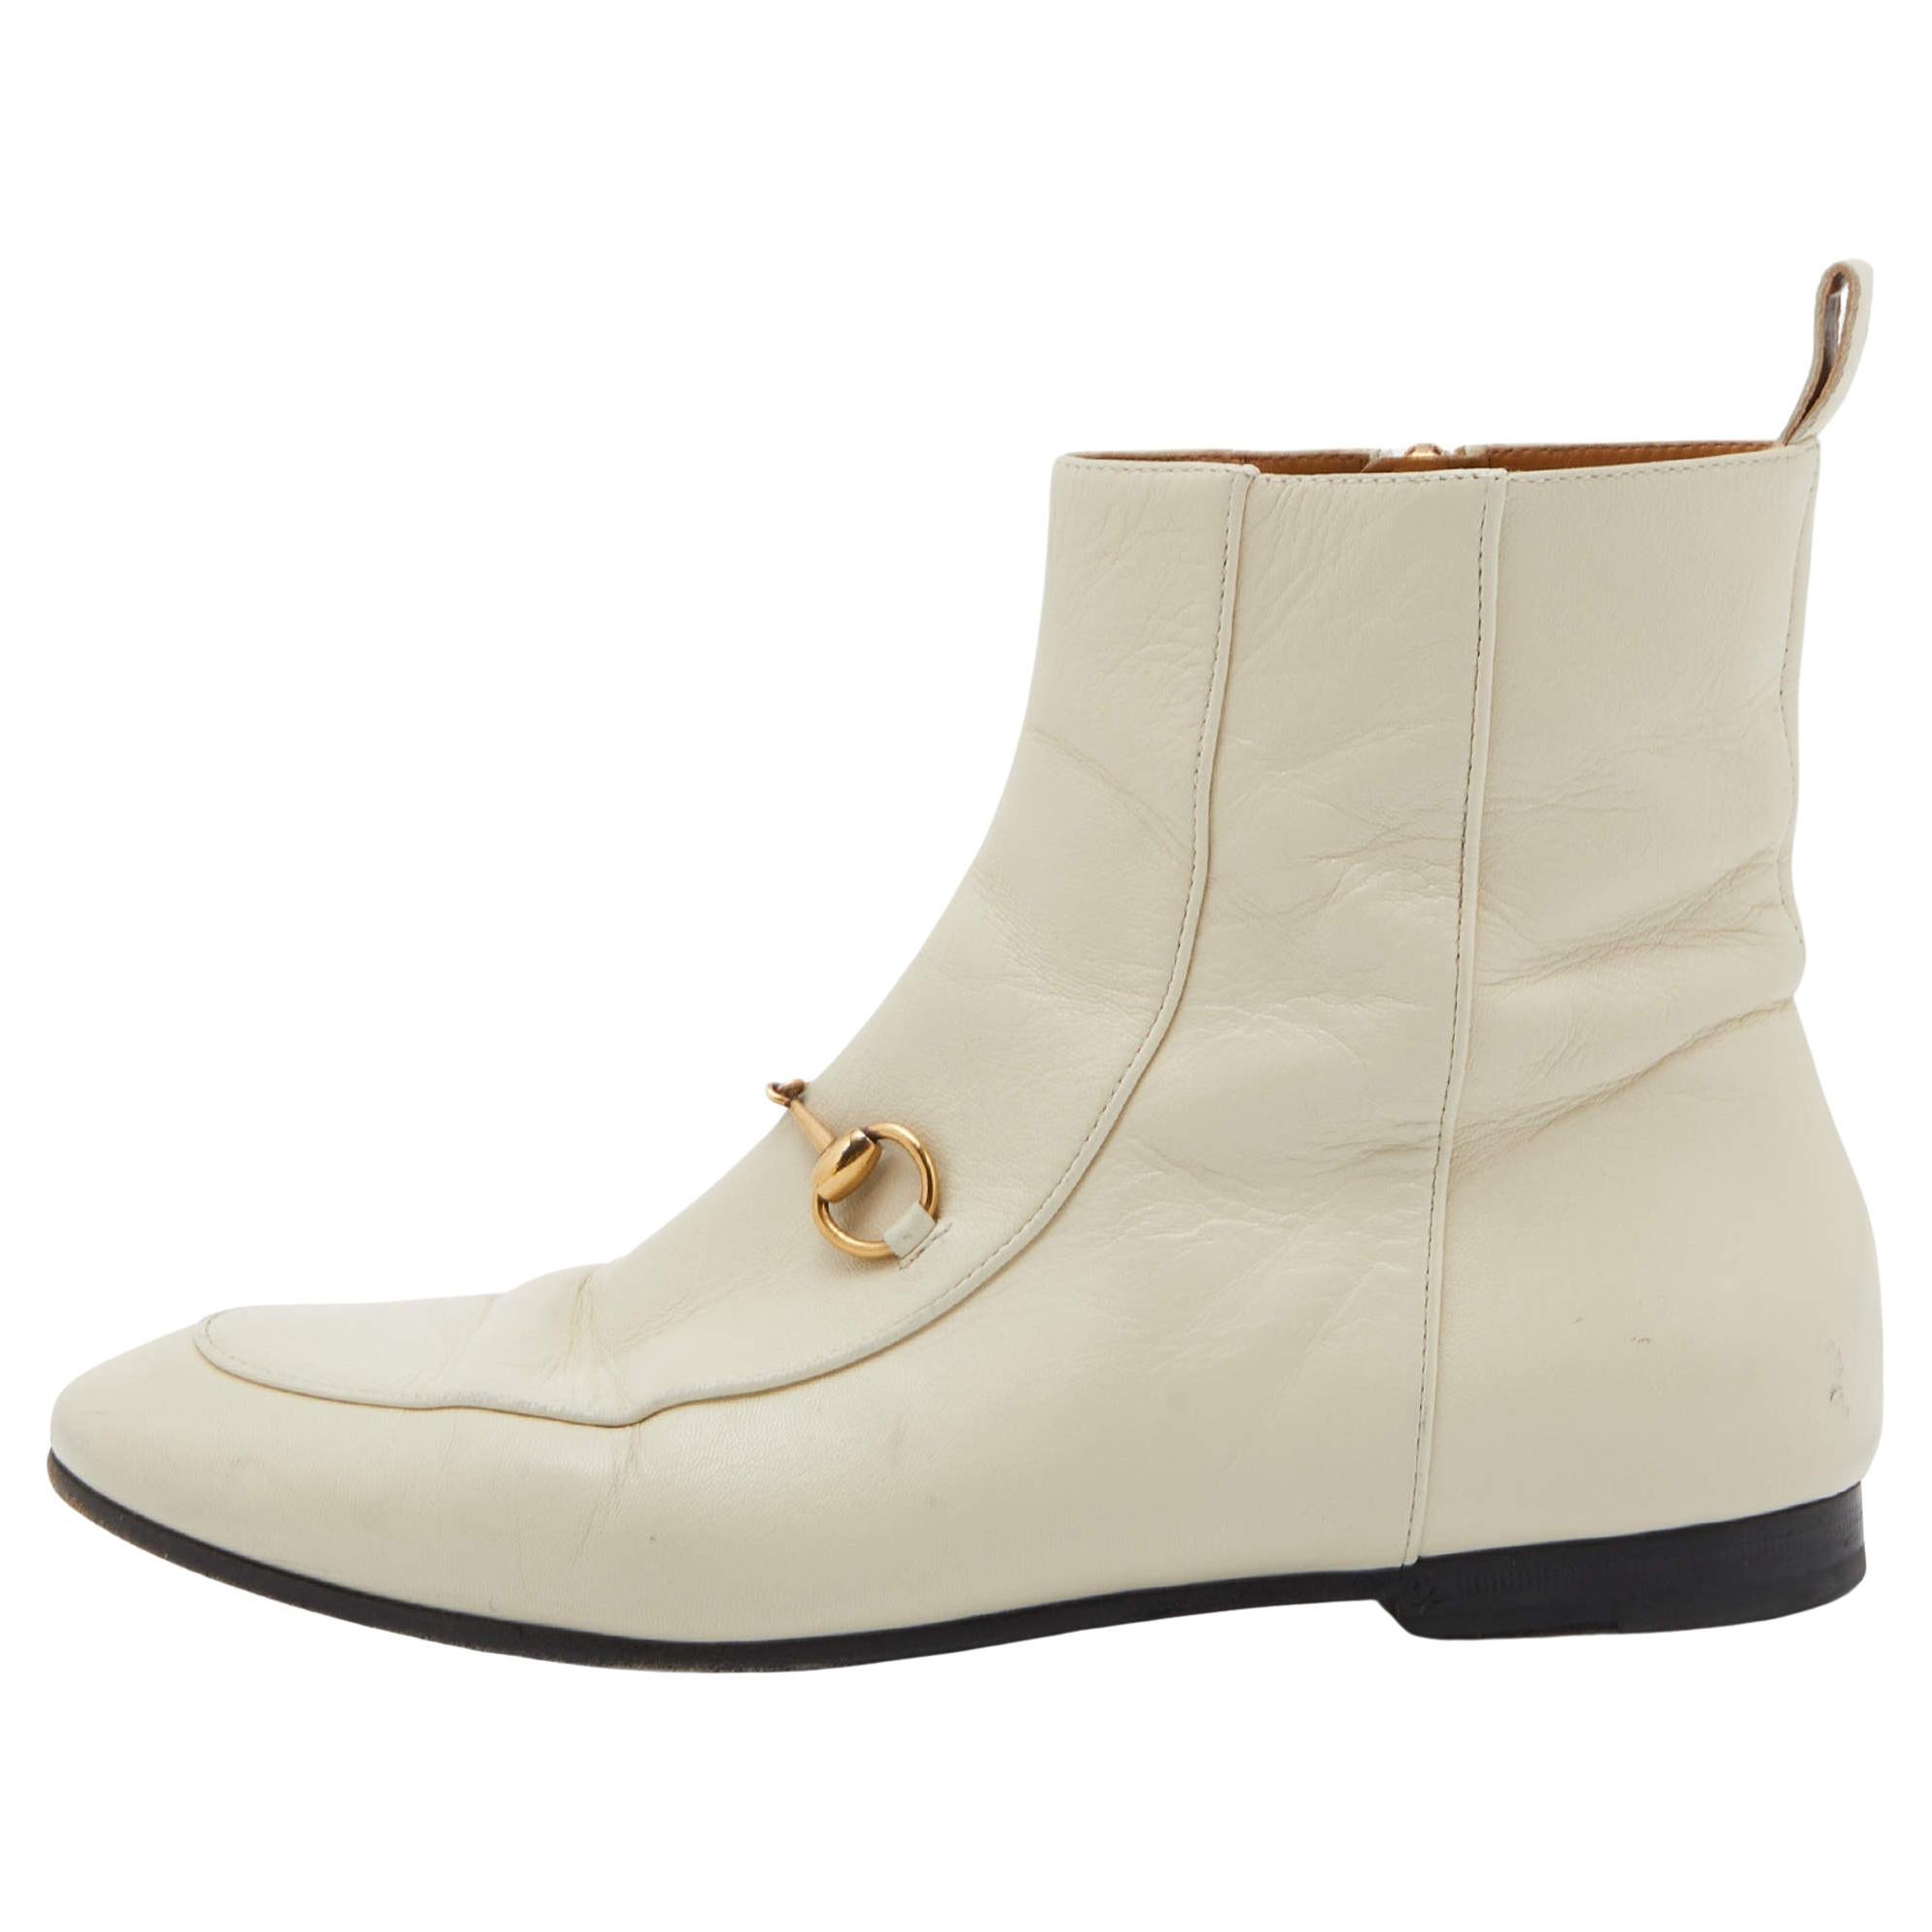 Gucci Cream Leather Horsebit Ankle Boots Size 38 For Sale